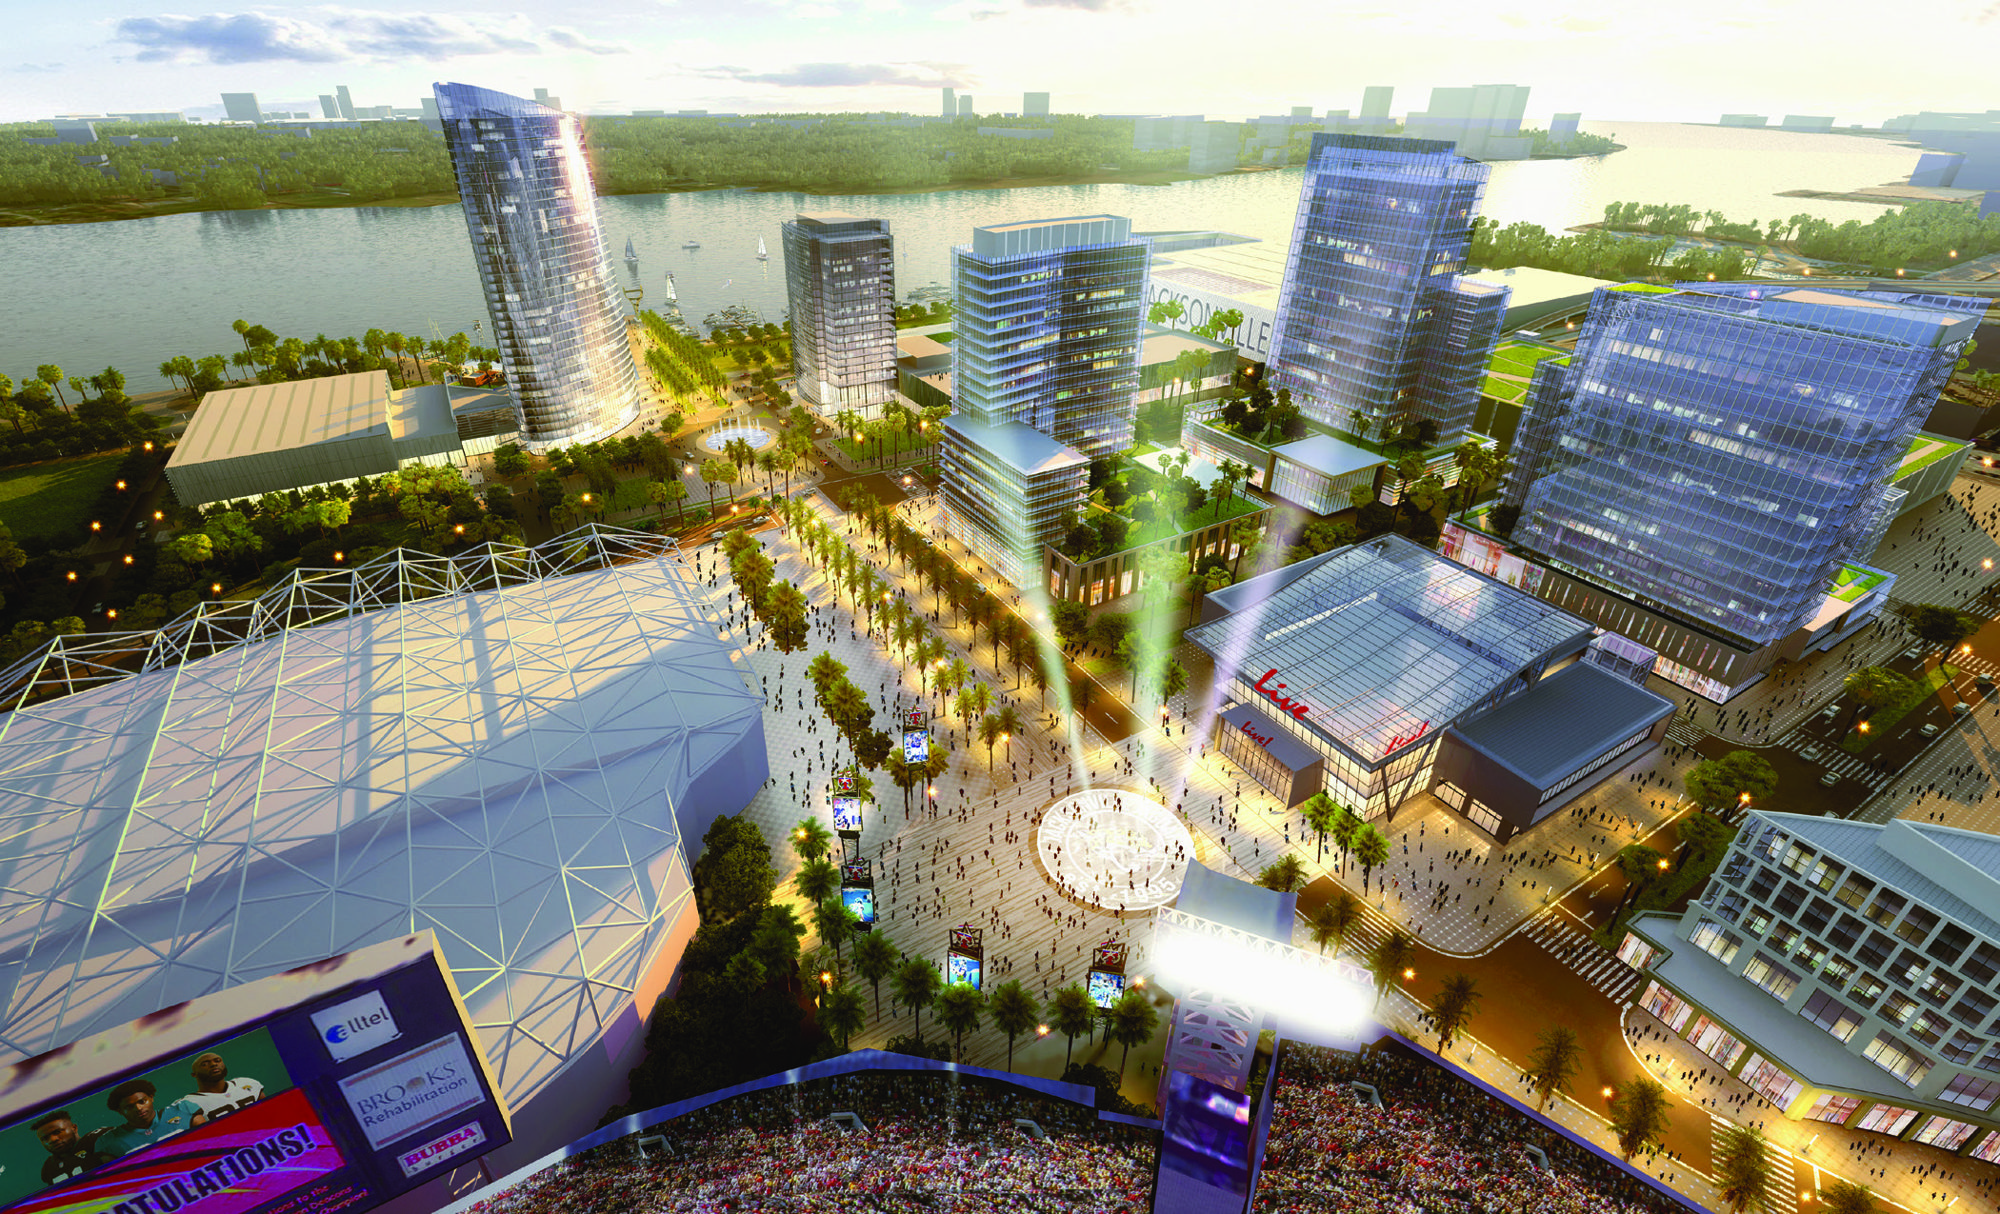 An artist's rendering of the Lot J development released by the city Wednesday.